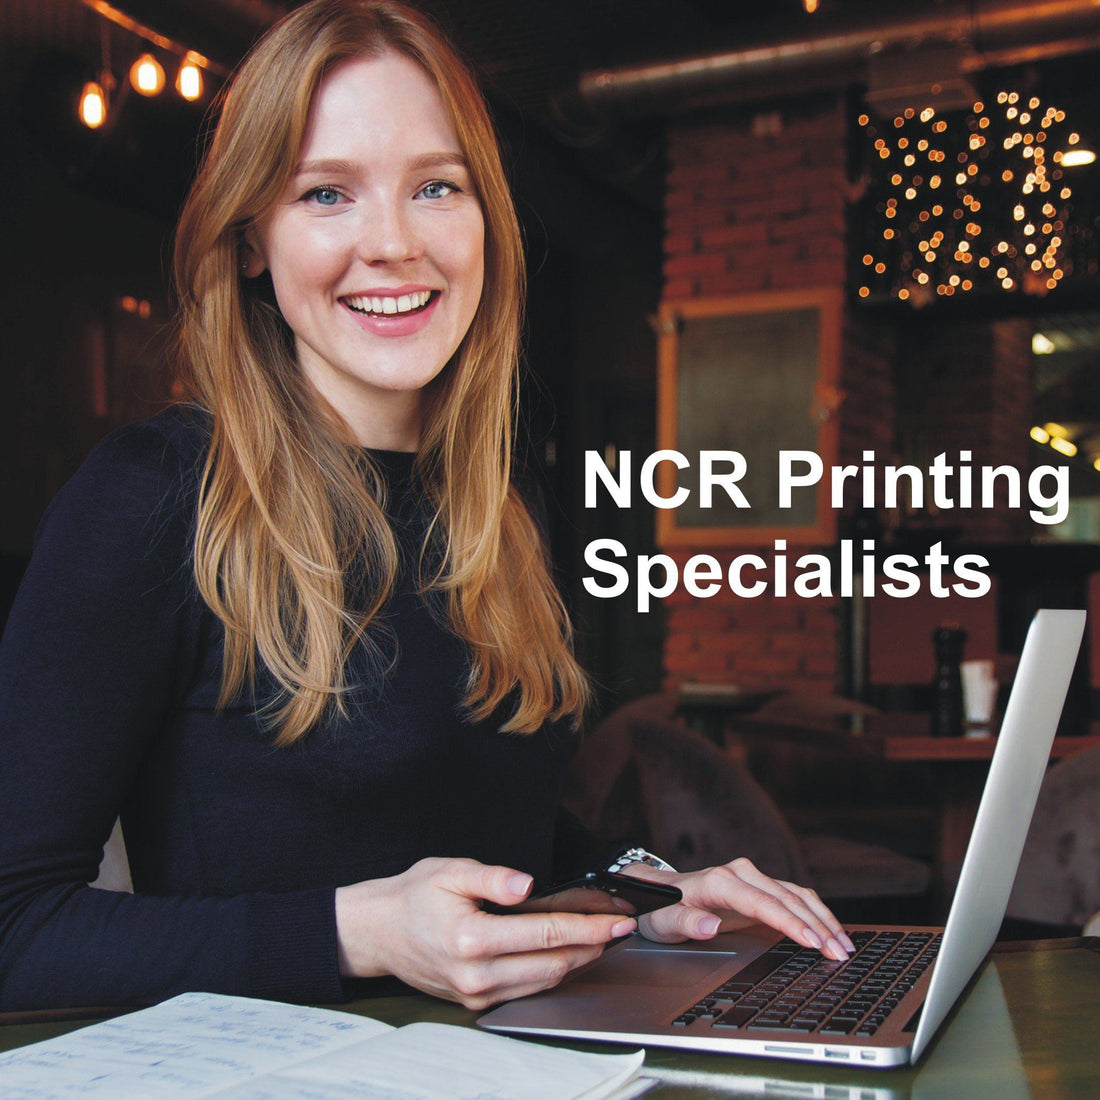 Do You Use Carbonless NCR Pads? - Customised 2/3/4 Part Printed Forms